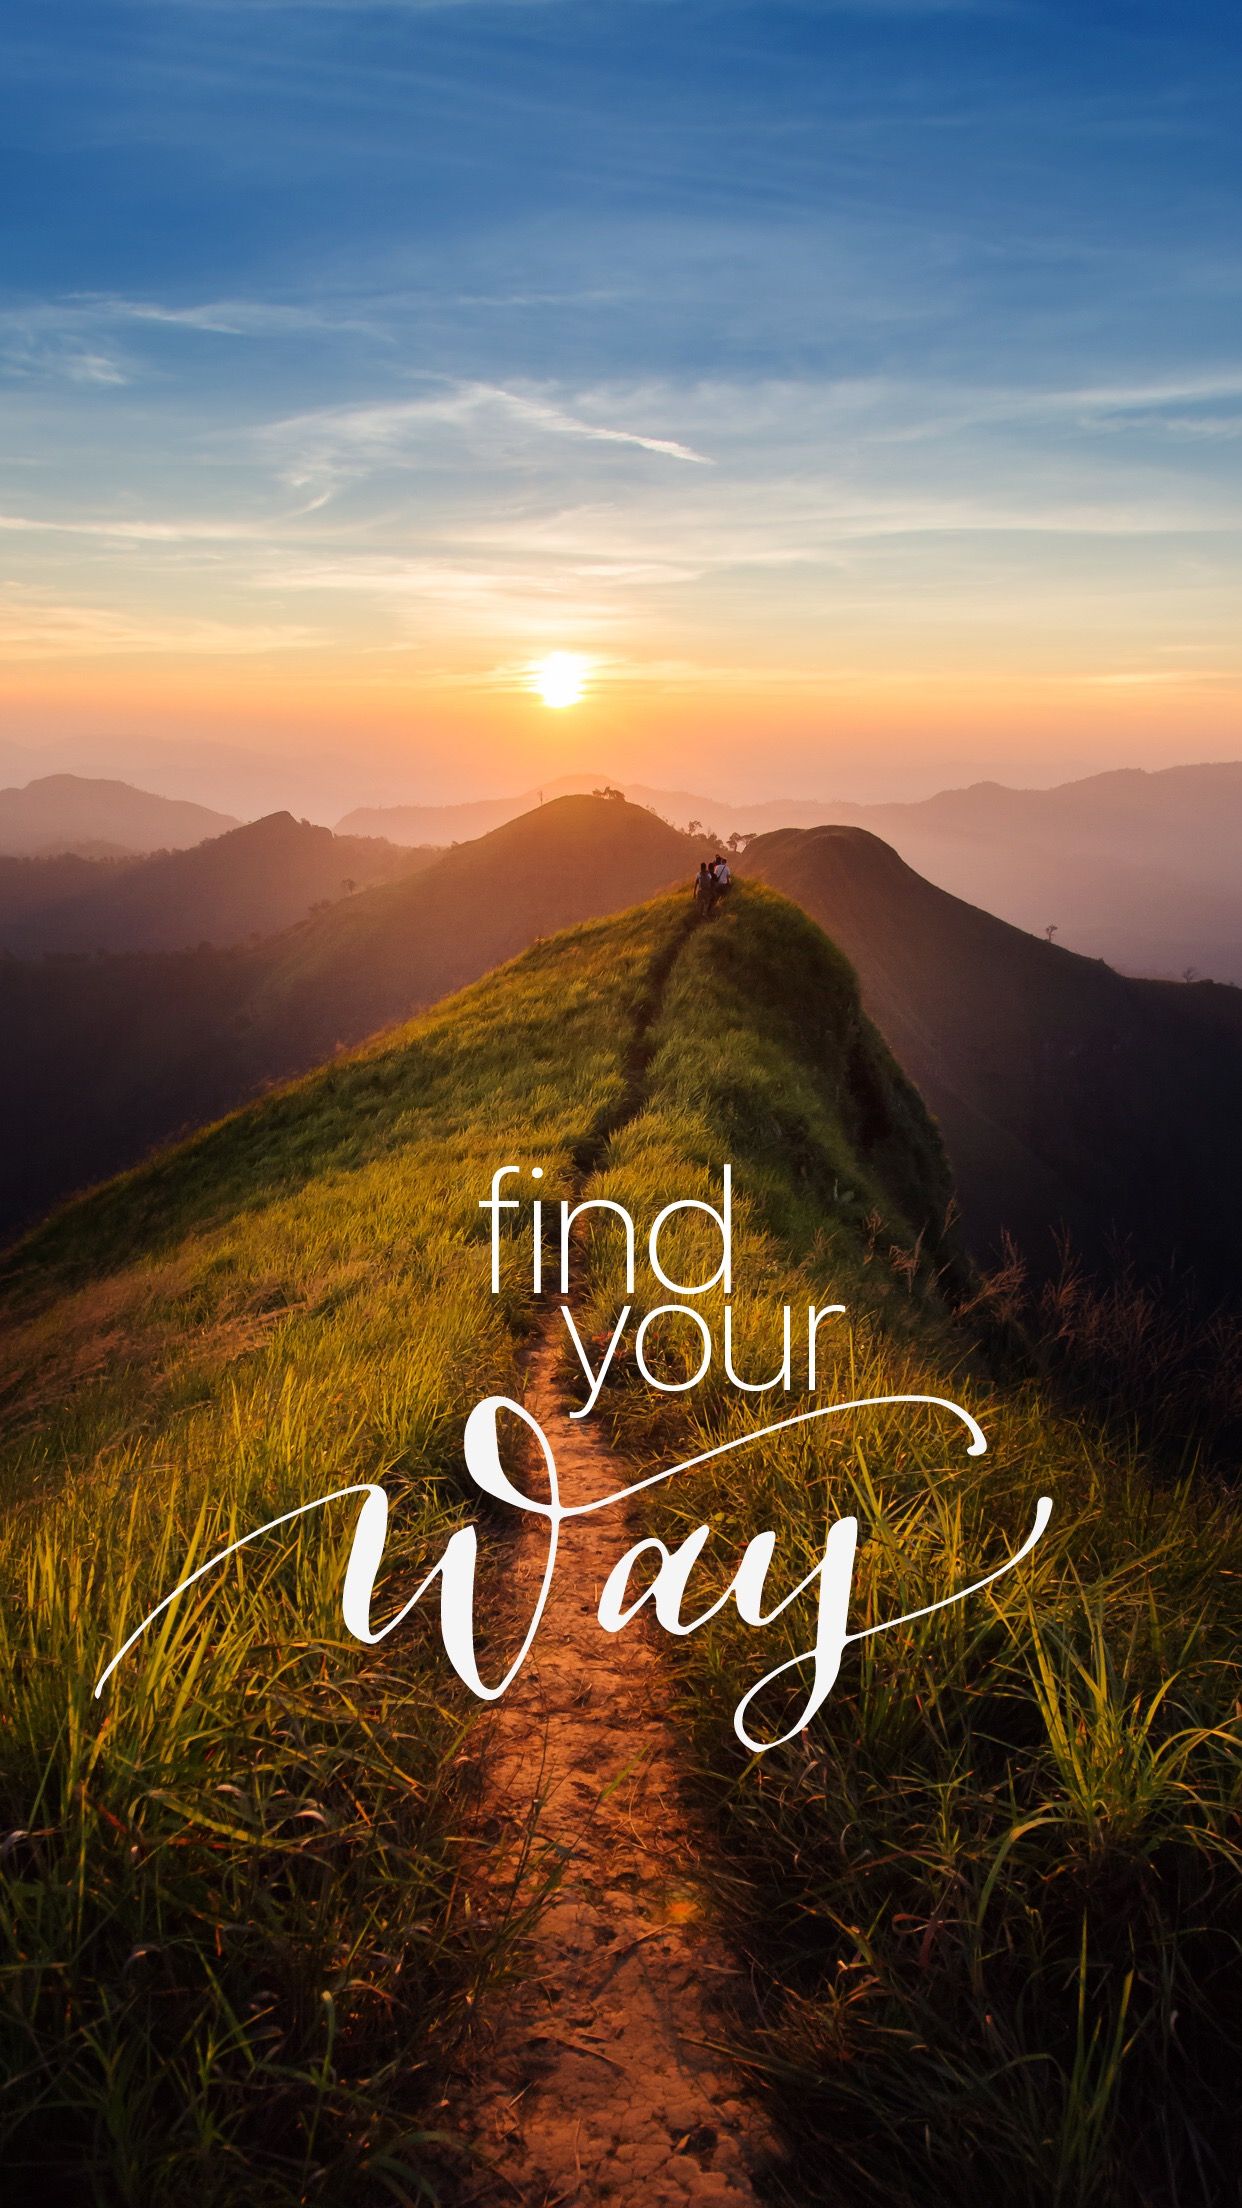 Wallpaper Find Your Way Inspiring Quotes About Life